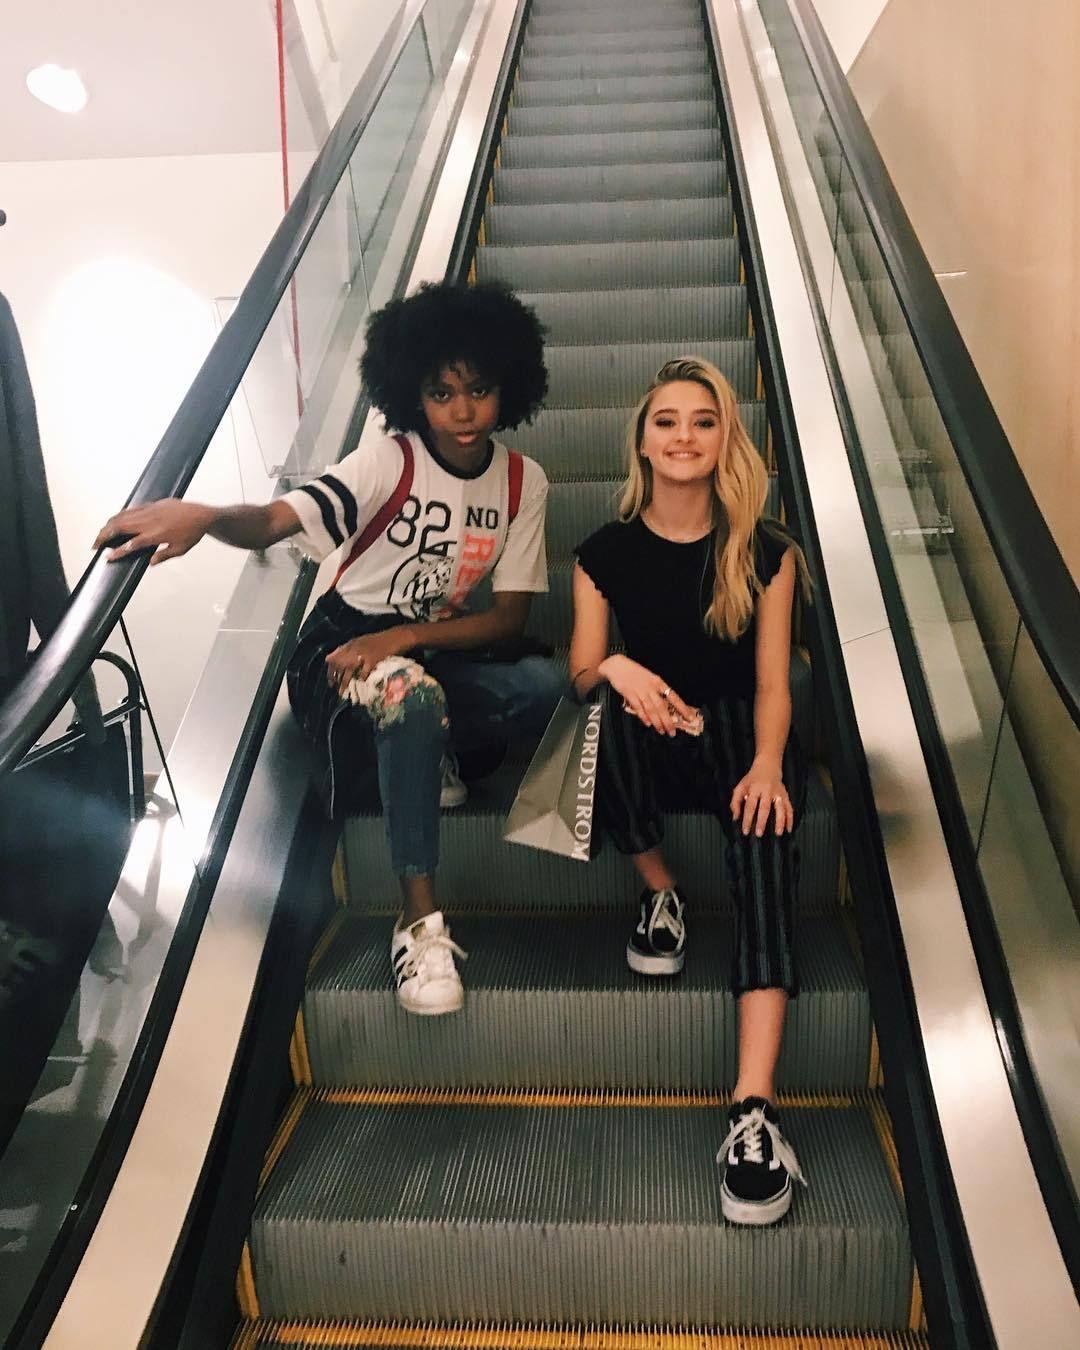 Riele Downs, Lizzy Greene: Staircase to. insta. Cool